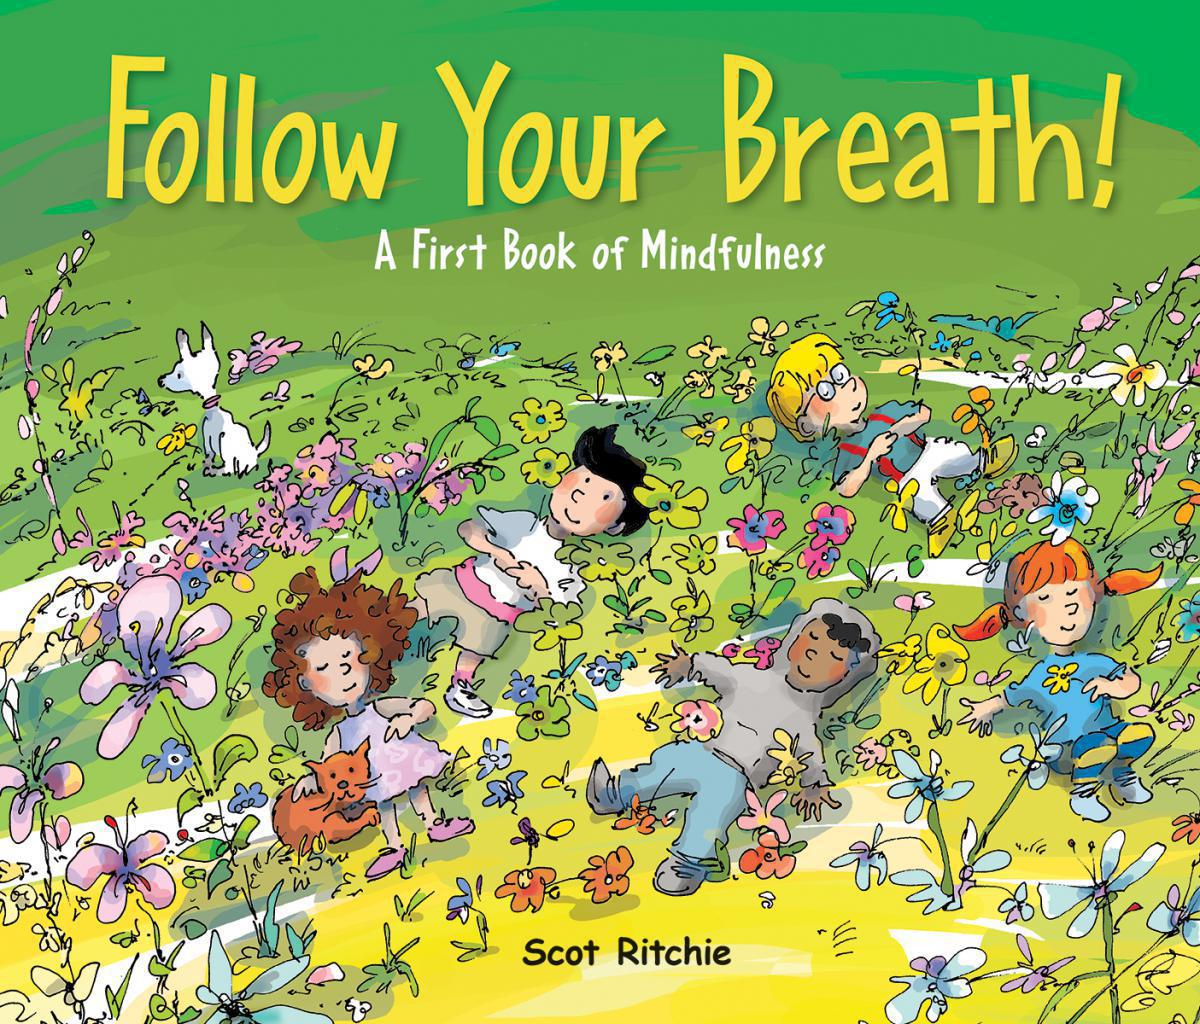  Follow Your Breath! A First Book of Mindfulness